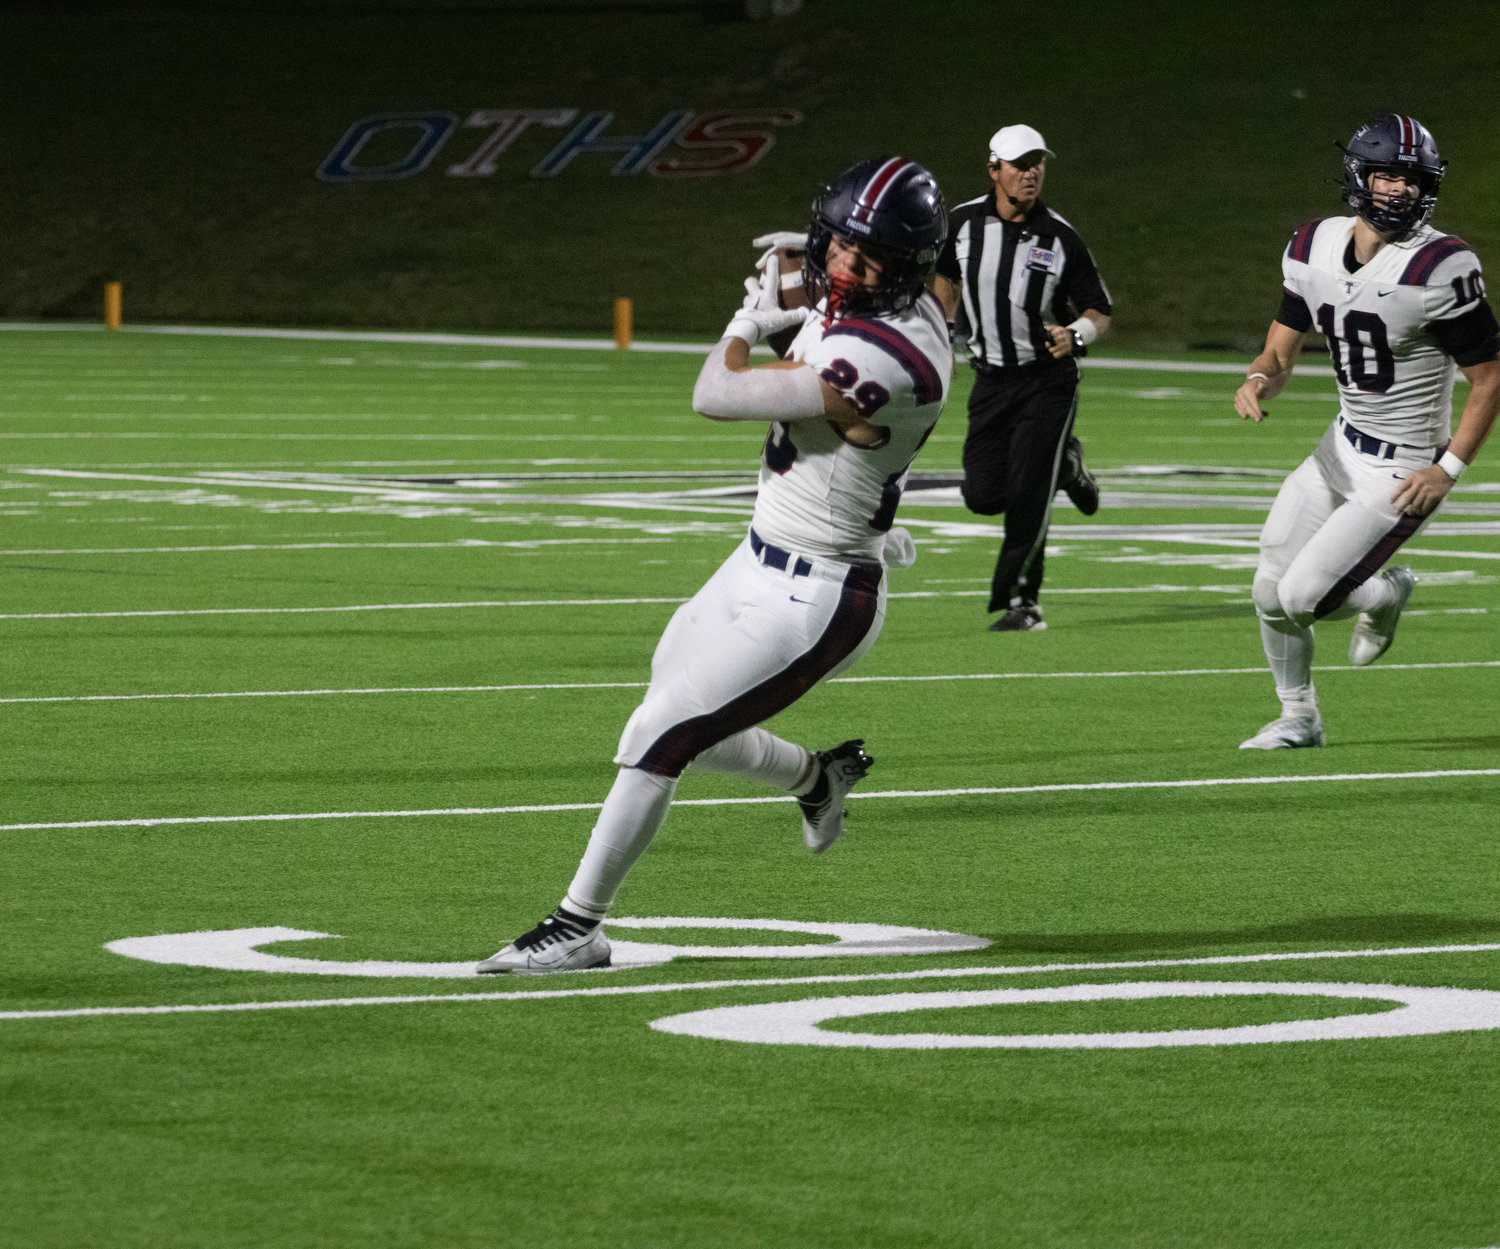 Tompkins' Dylan Rodriguez catches a pass during Friday's game between Tompkins and Paetow at Rhodes Stadium.